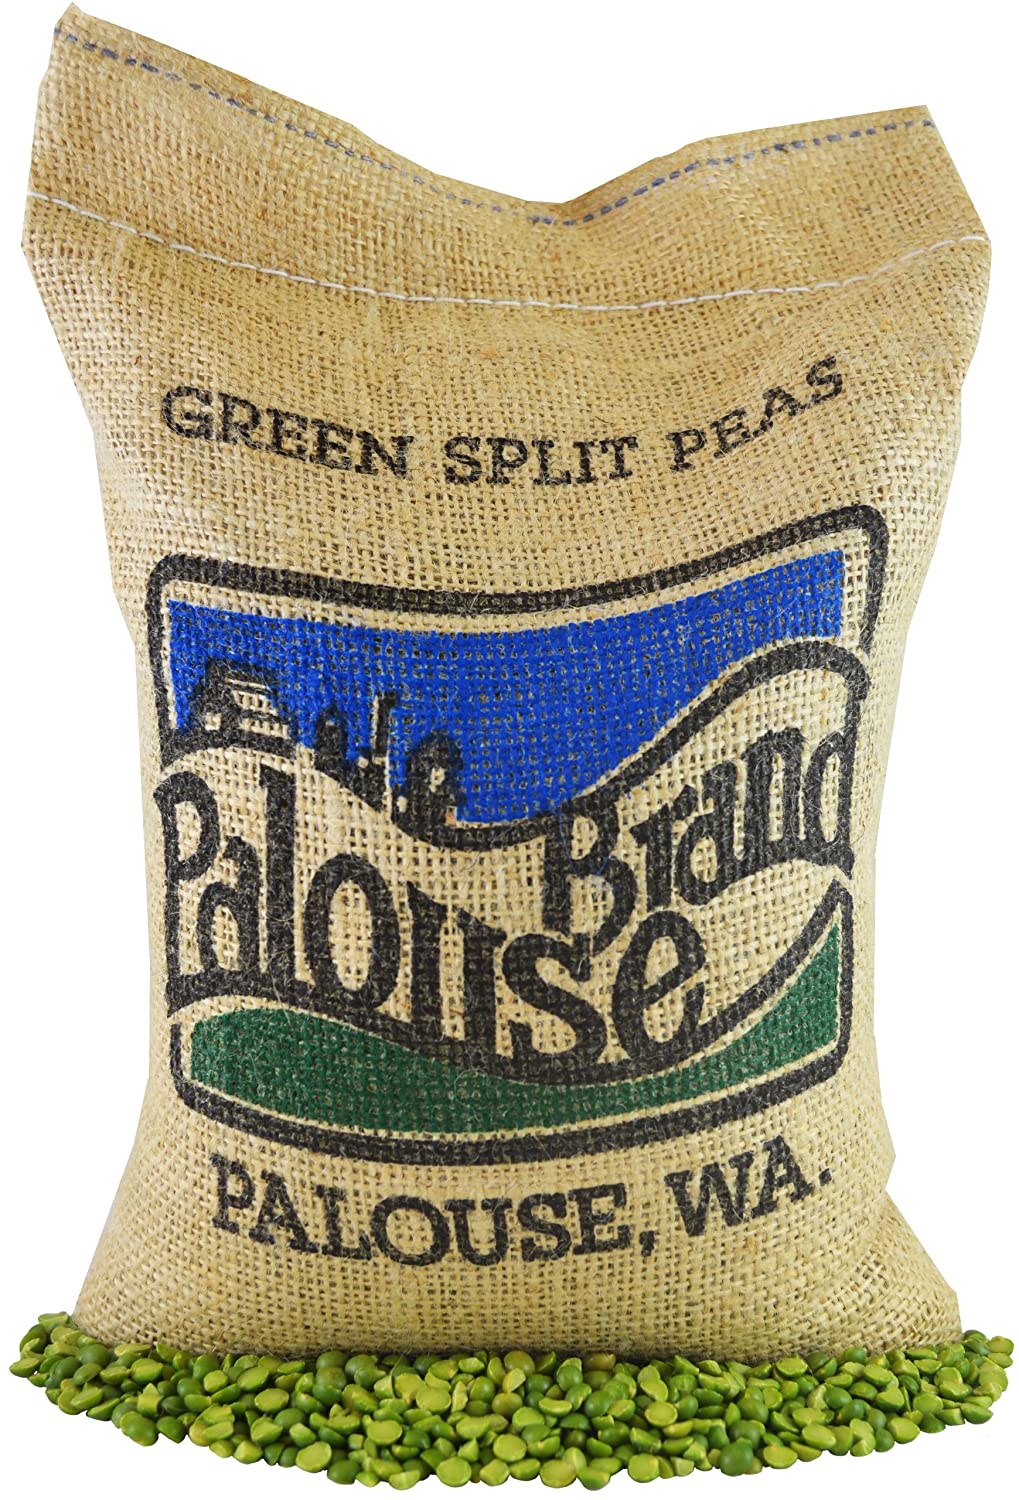 Burlap Bag Green Split Peas • 100% Desiccant Free • 5 lbs • Non-GMO Project Verified • 100% Non-Irradiated • USA Grown • Field Traced •